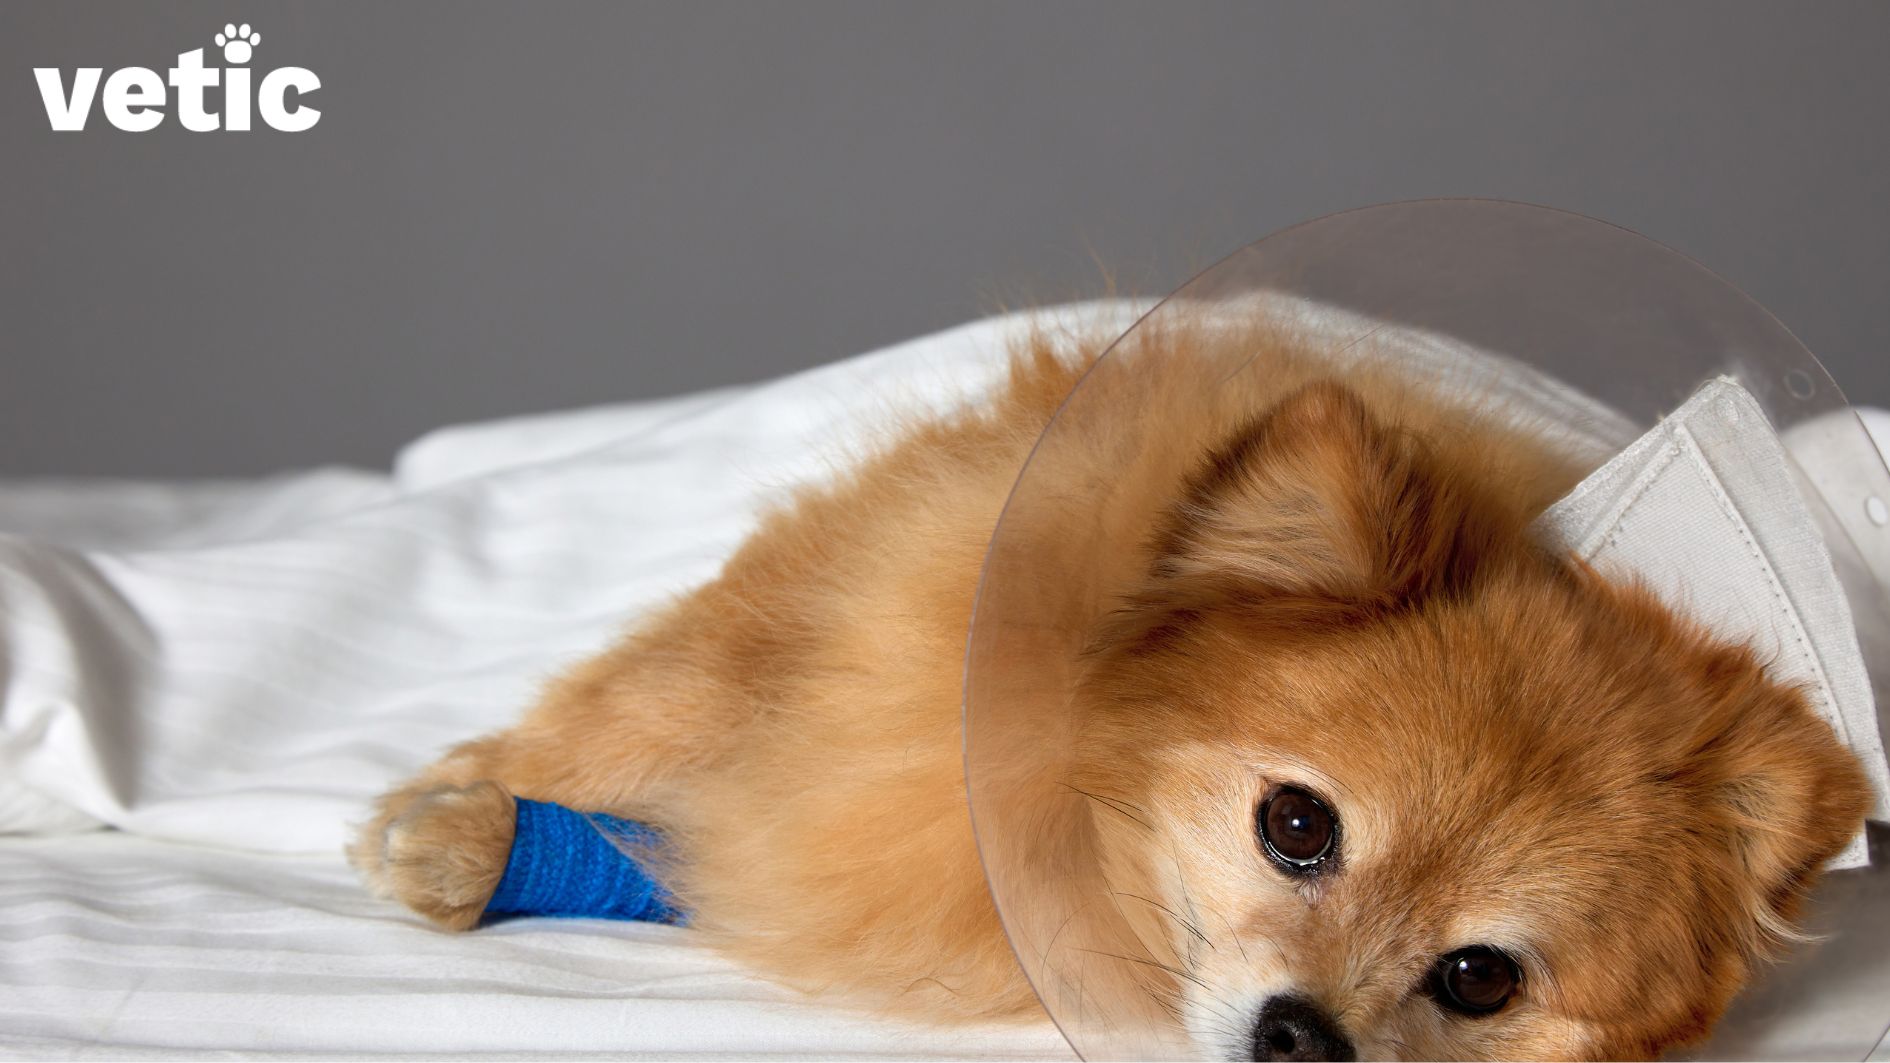 Tiny Pomeranian lying on a white bedsheet, on its side with a blue adhesive bandage on its front left leg. The dog has a e-collar on.